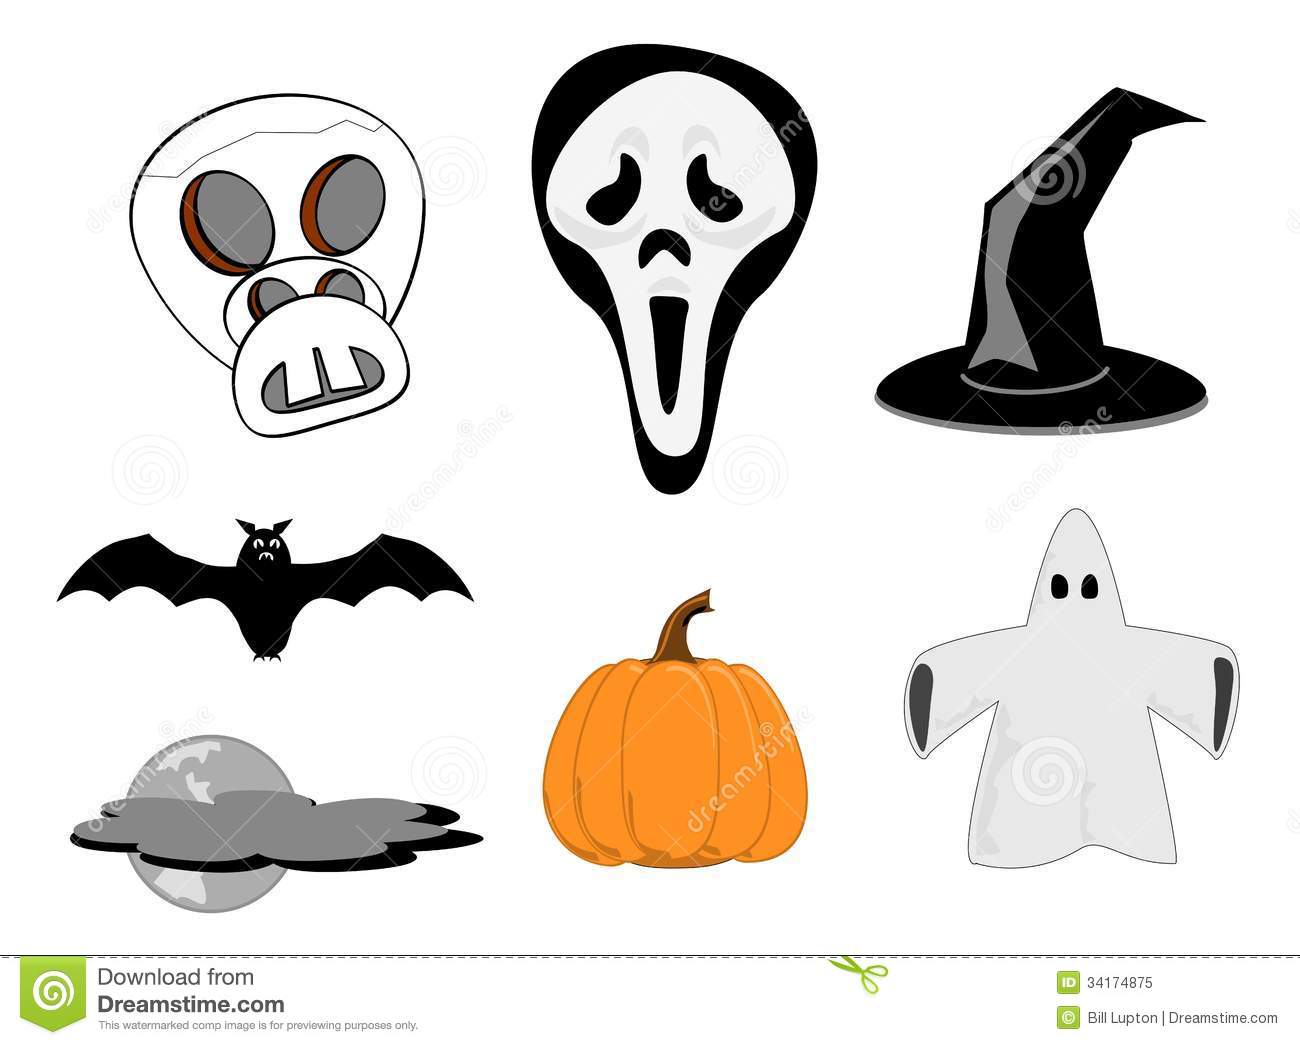 Spooky Halloween Objects Skull Scream Mask Witches Hat Bat Moon Cloud